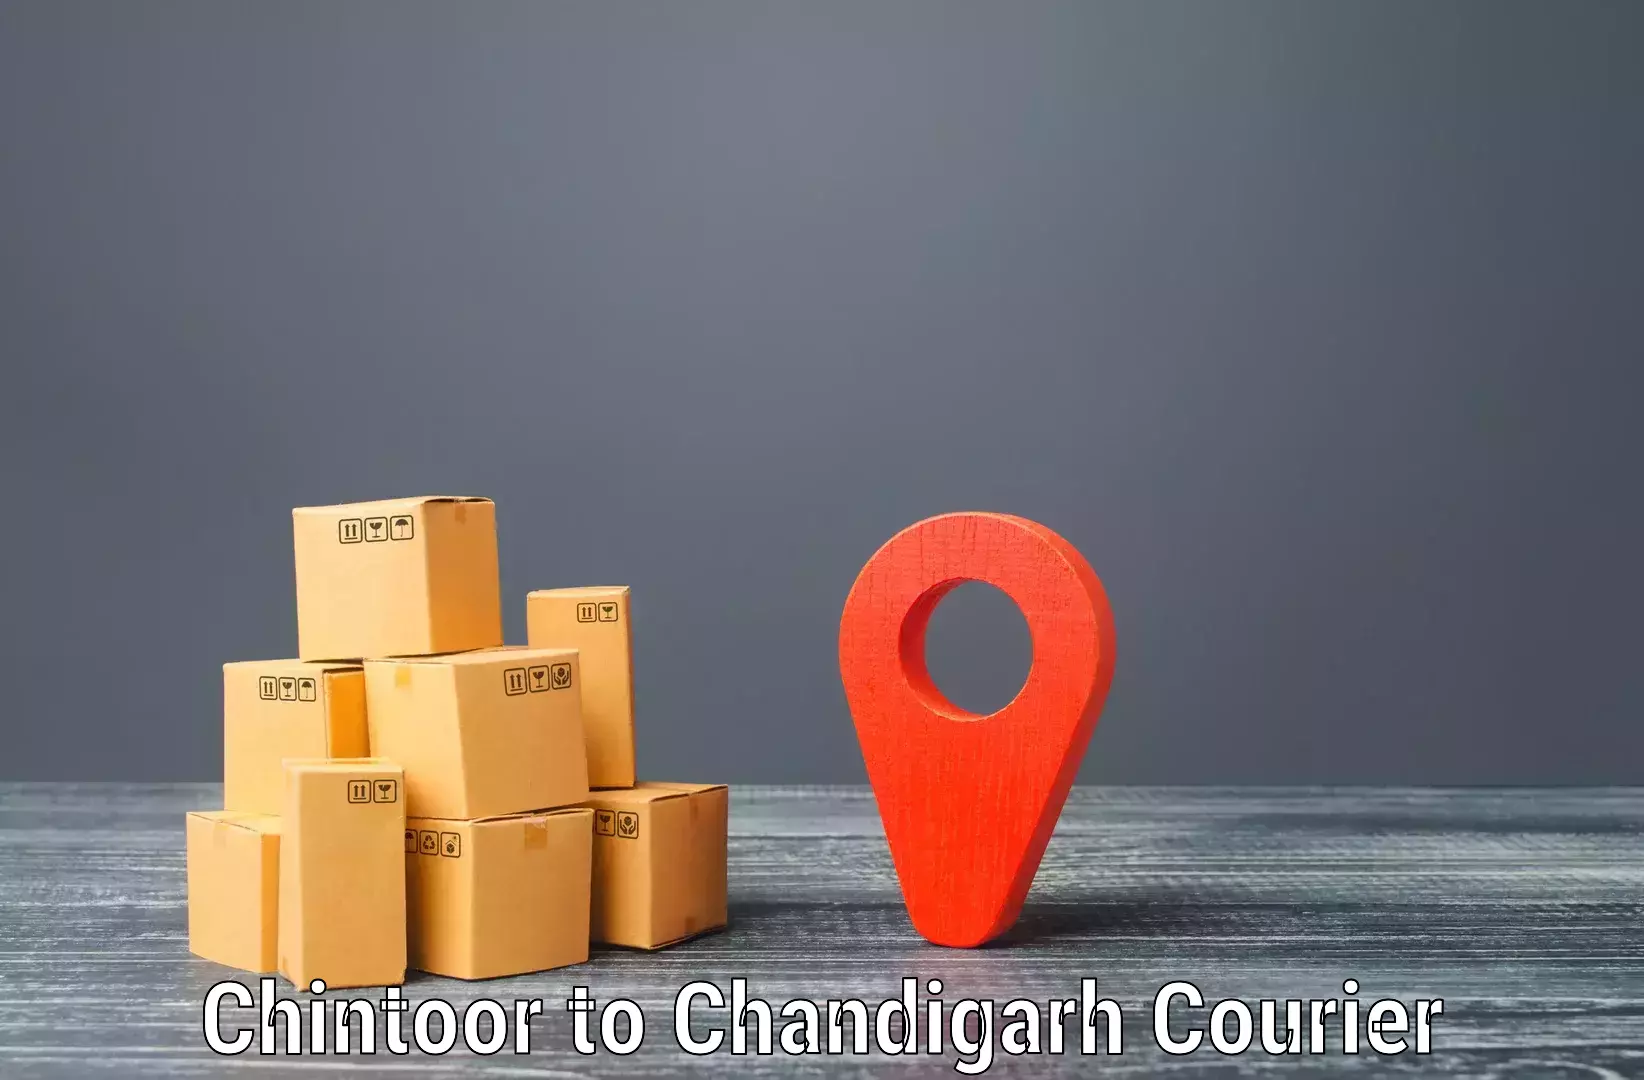 Supply chain efficiency Chintoor to Chandigarh